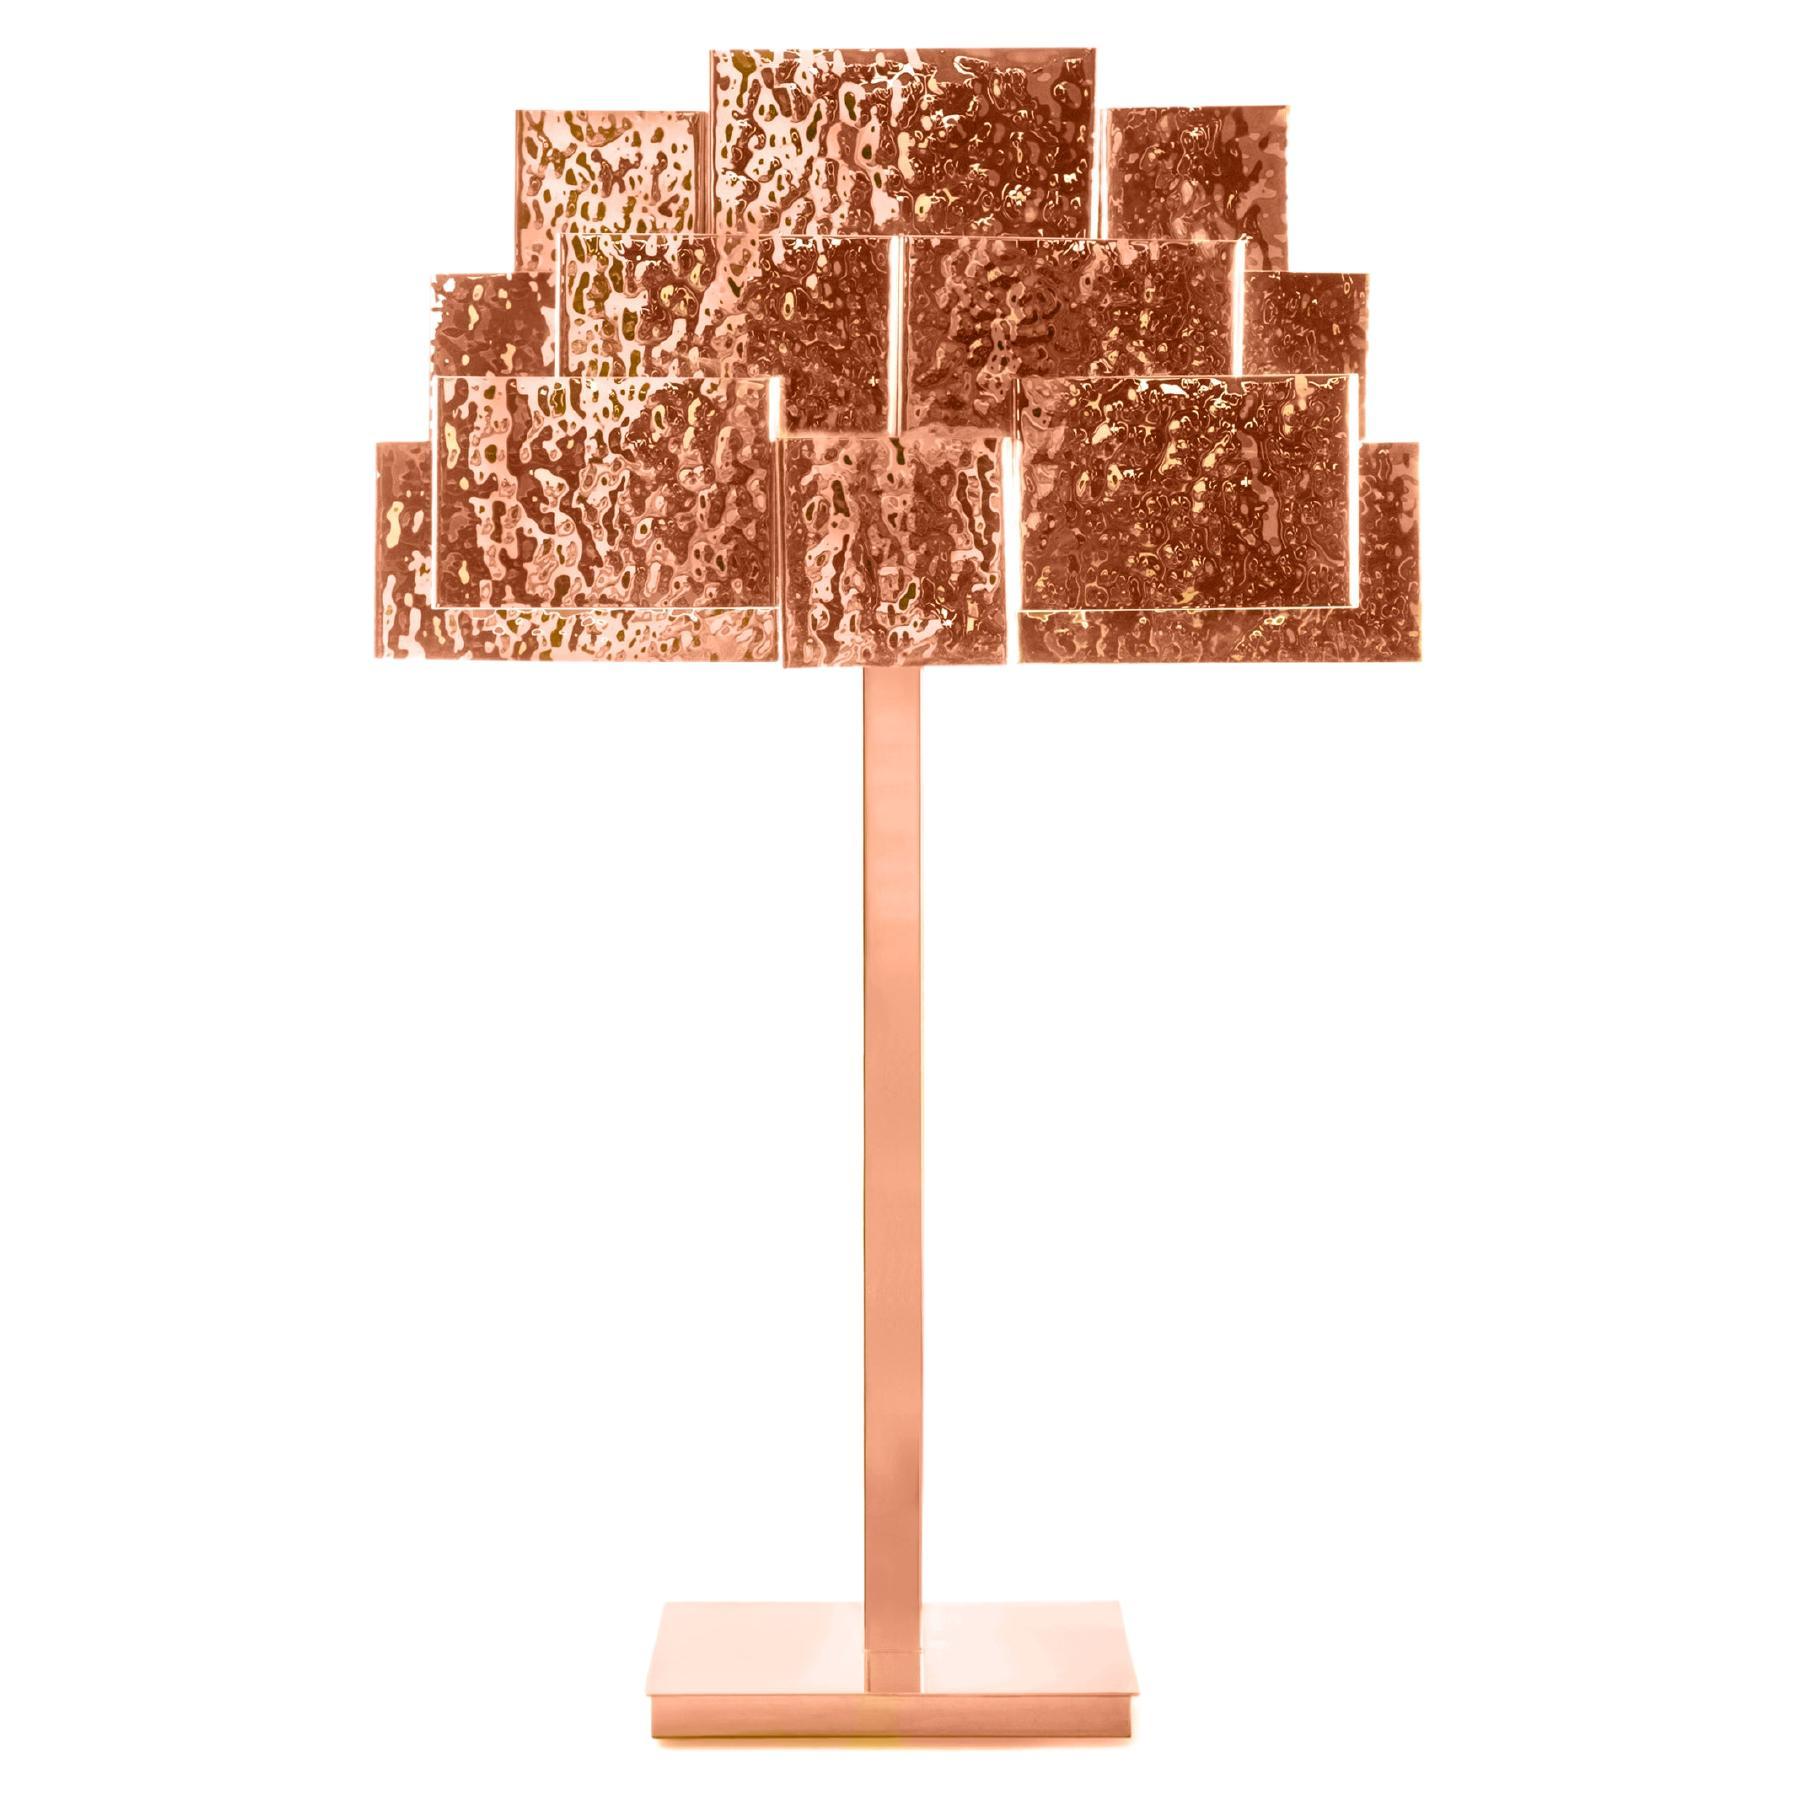 Inspiring Trees Table Lamp Hammered Copper, InsidherLand by Joana Santos Barbosa For Sale